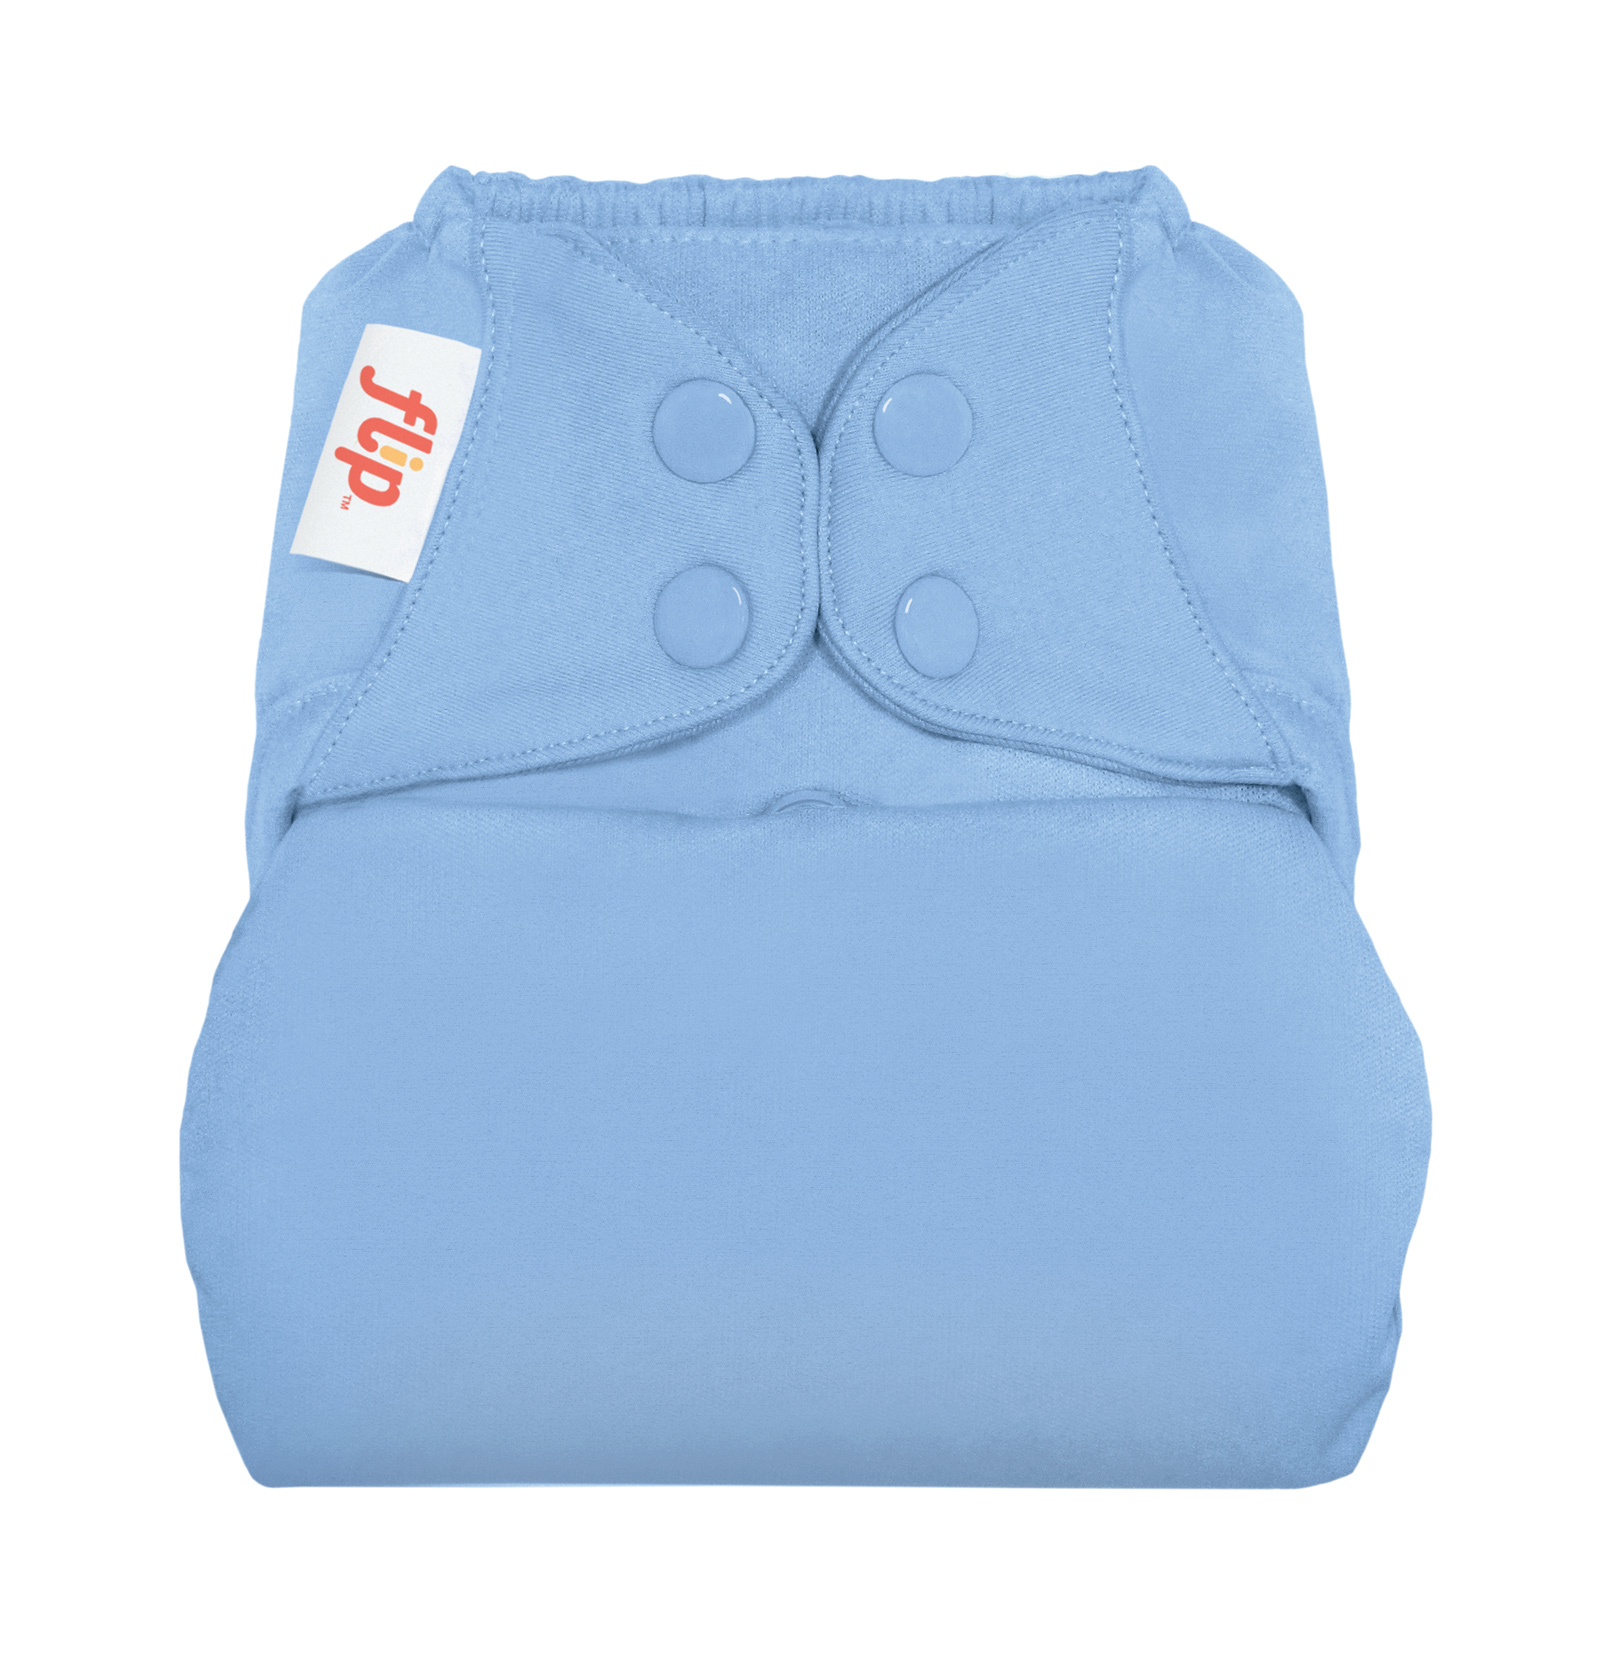 Flip - Snap Cloth Diaper Cover & Stay-Dry Insert